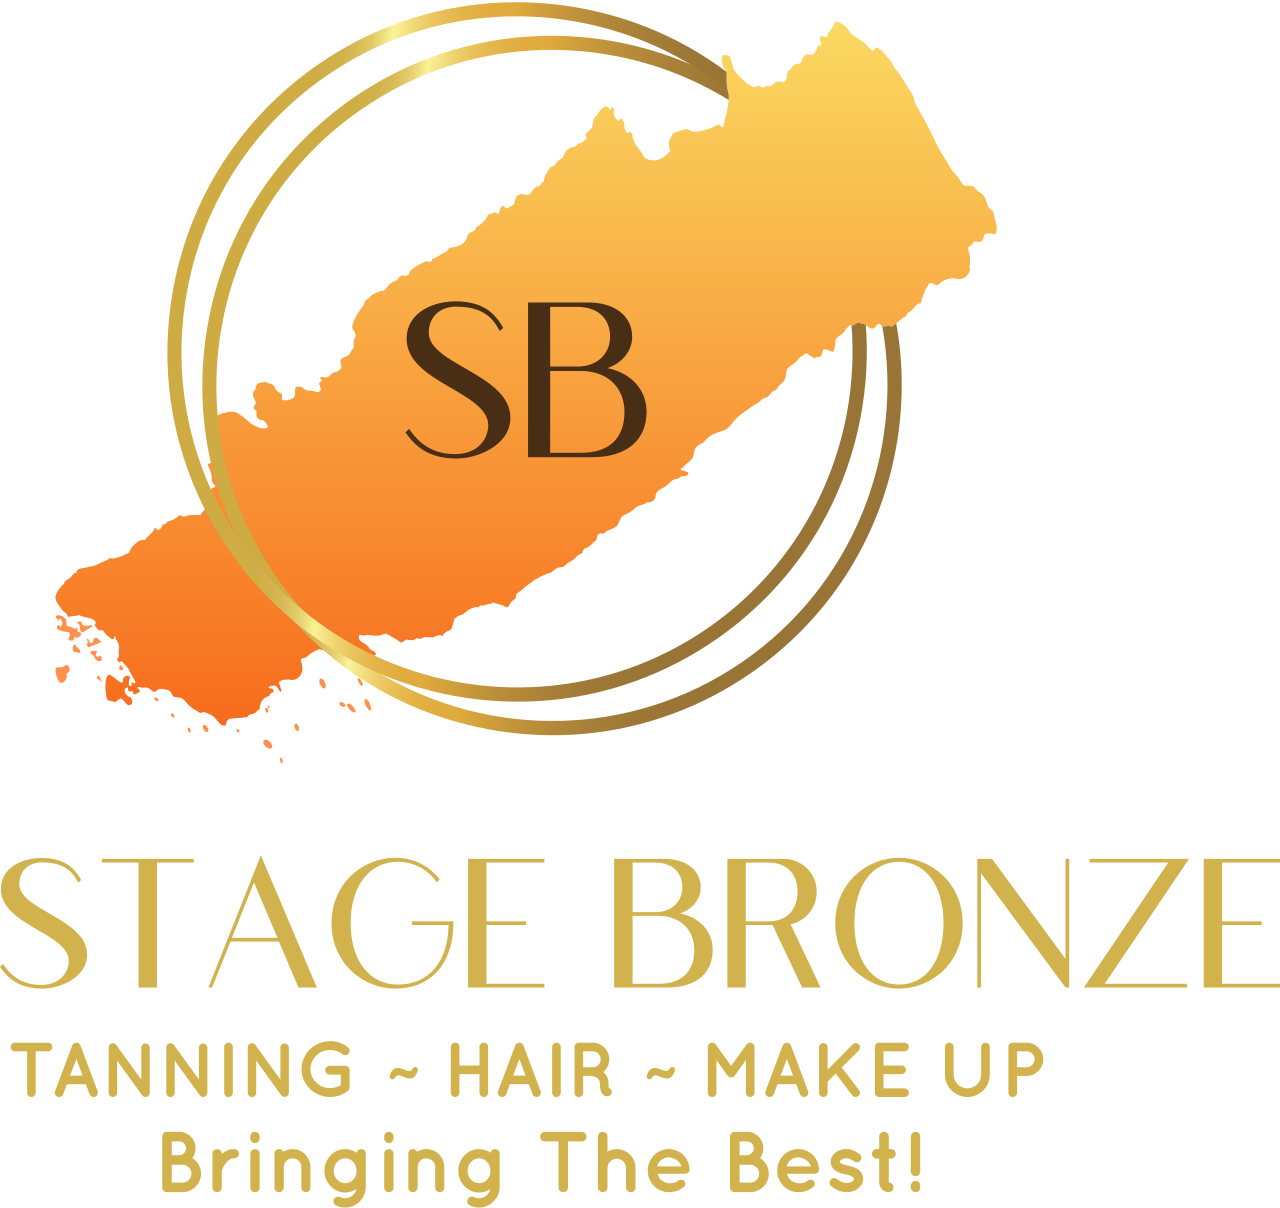 STAGE BRONZE Tanning, Hair, & Makeup's web page